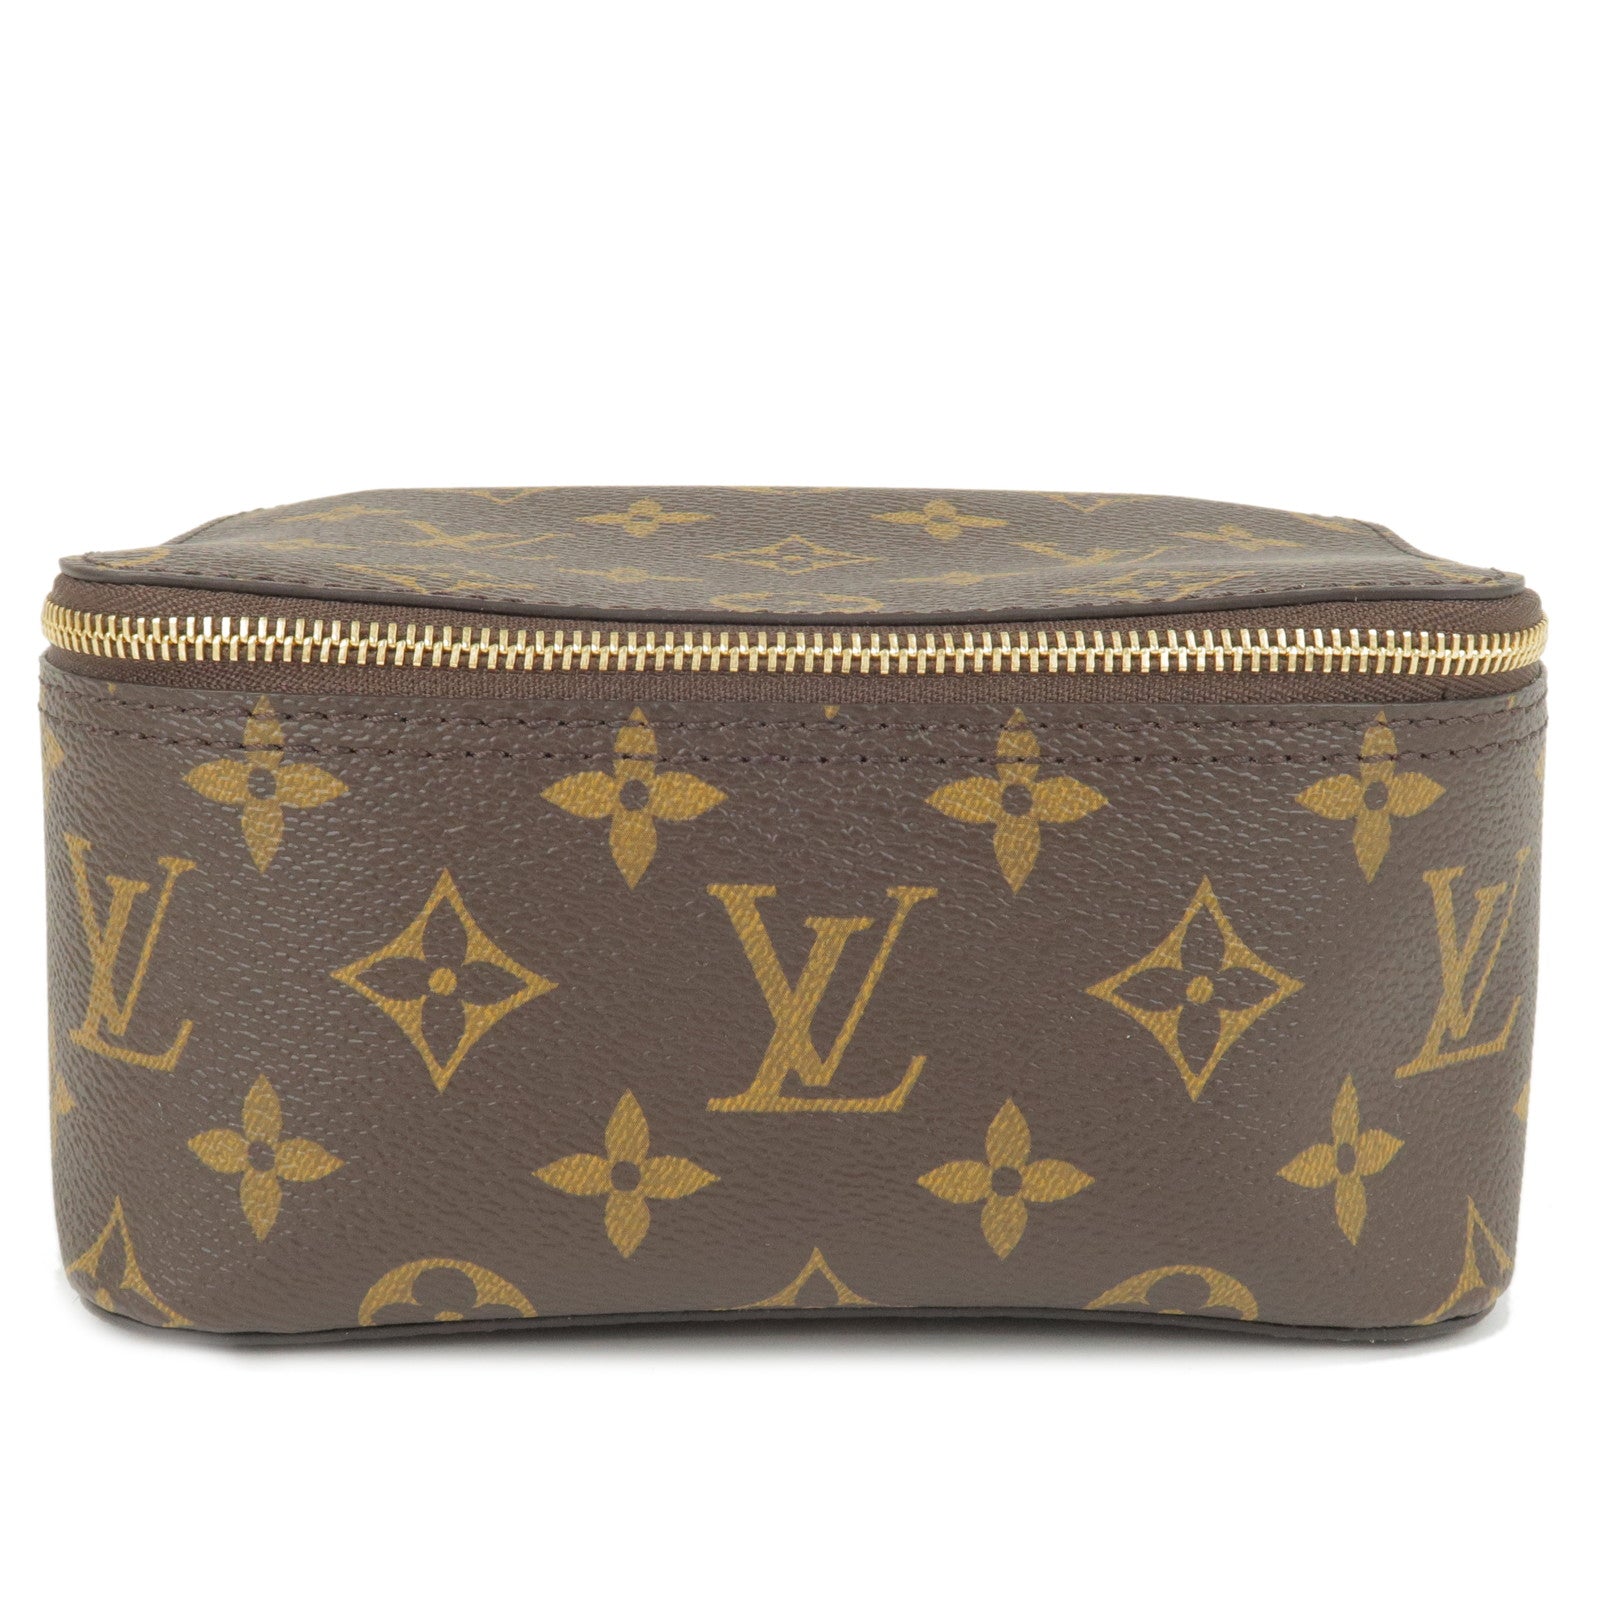 Dopp kit leather small bag Louis Vuitton Multicolour in Leather